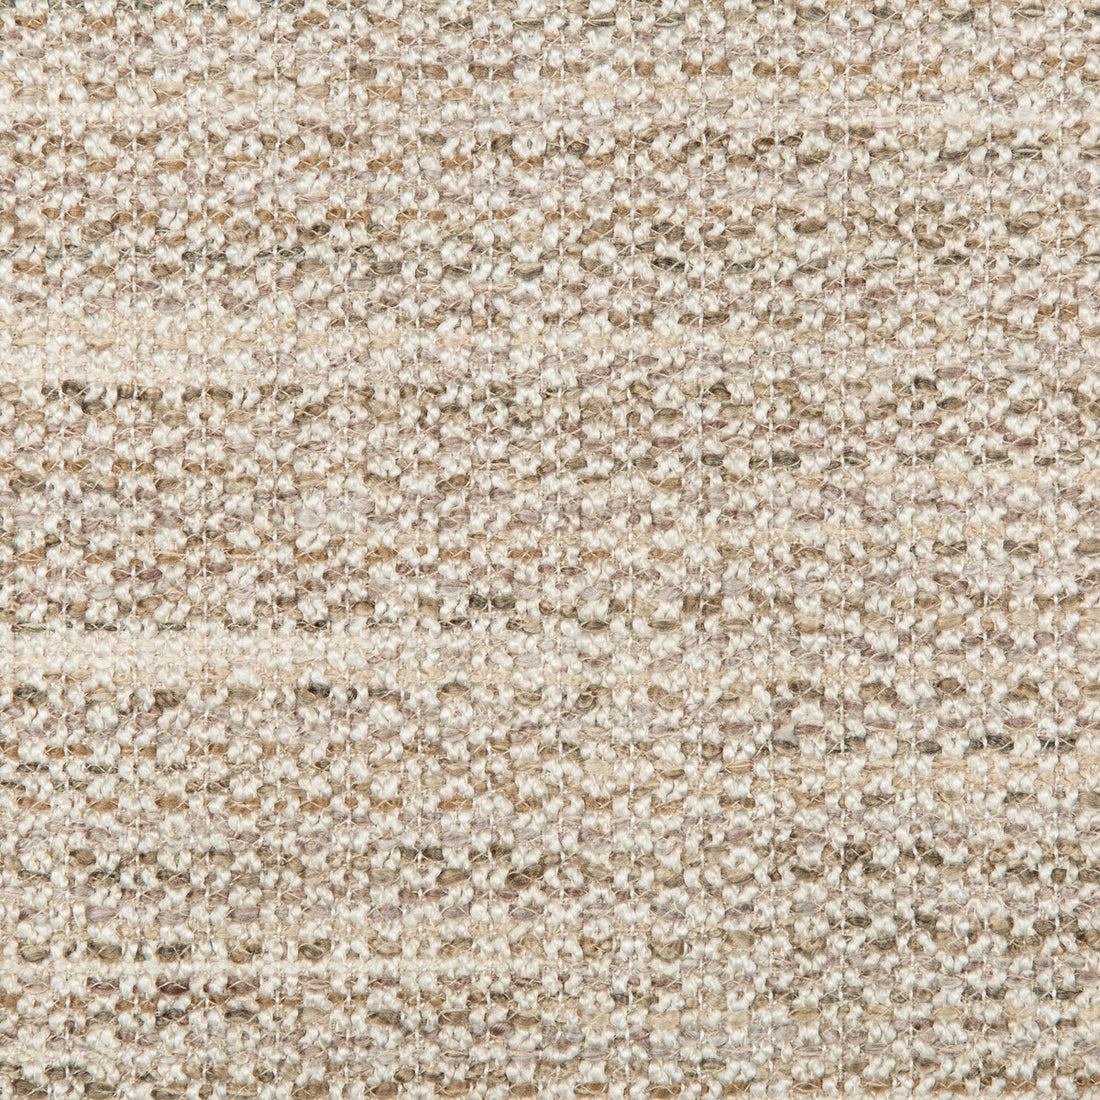 Sandibe Boucle fabric in wheat color - pattern 35511.16.0 - by Kravet Design in the Barclay Butera Sagamore collection